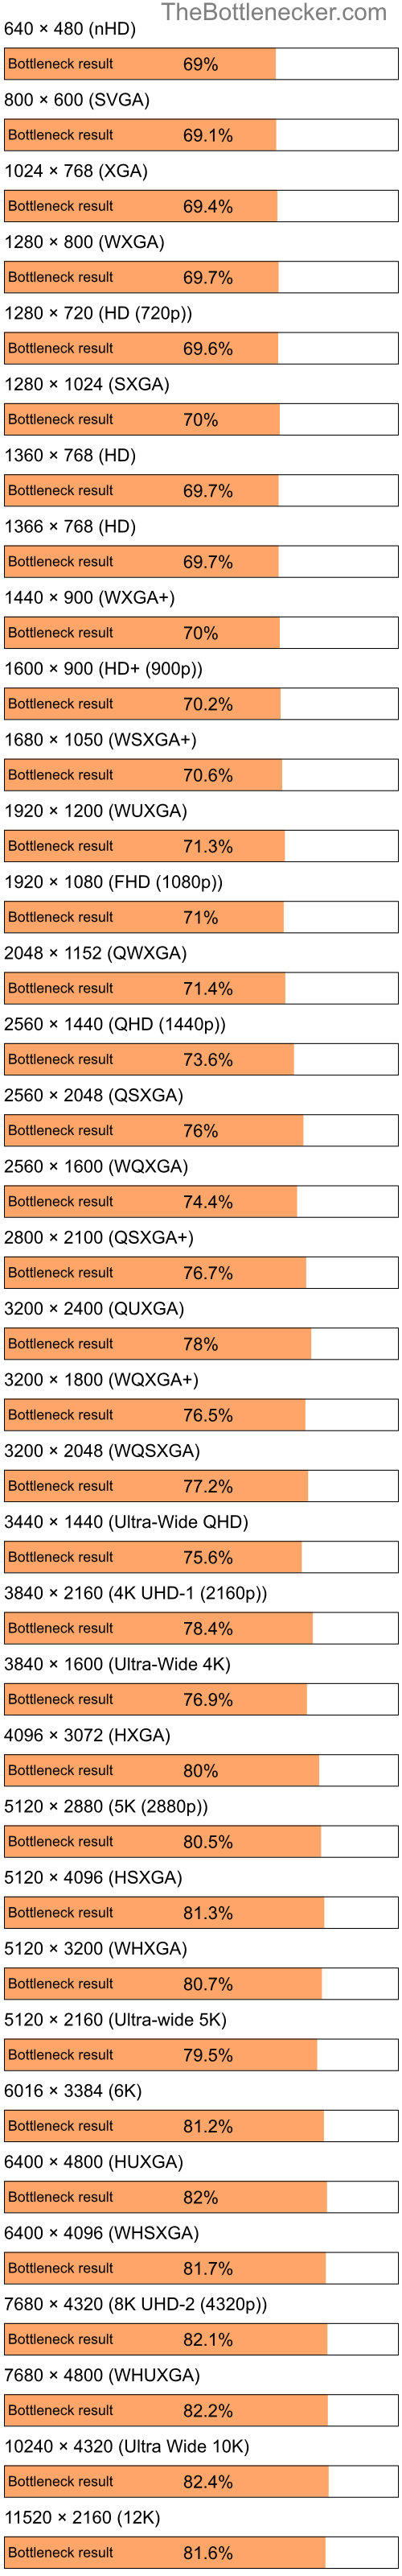 Bottleneck results by resolution for Intel Pentium 4 and AMD Mobility Radeon X1300 in Processor Intense Tasks